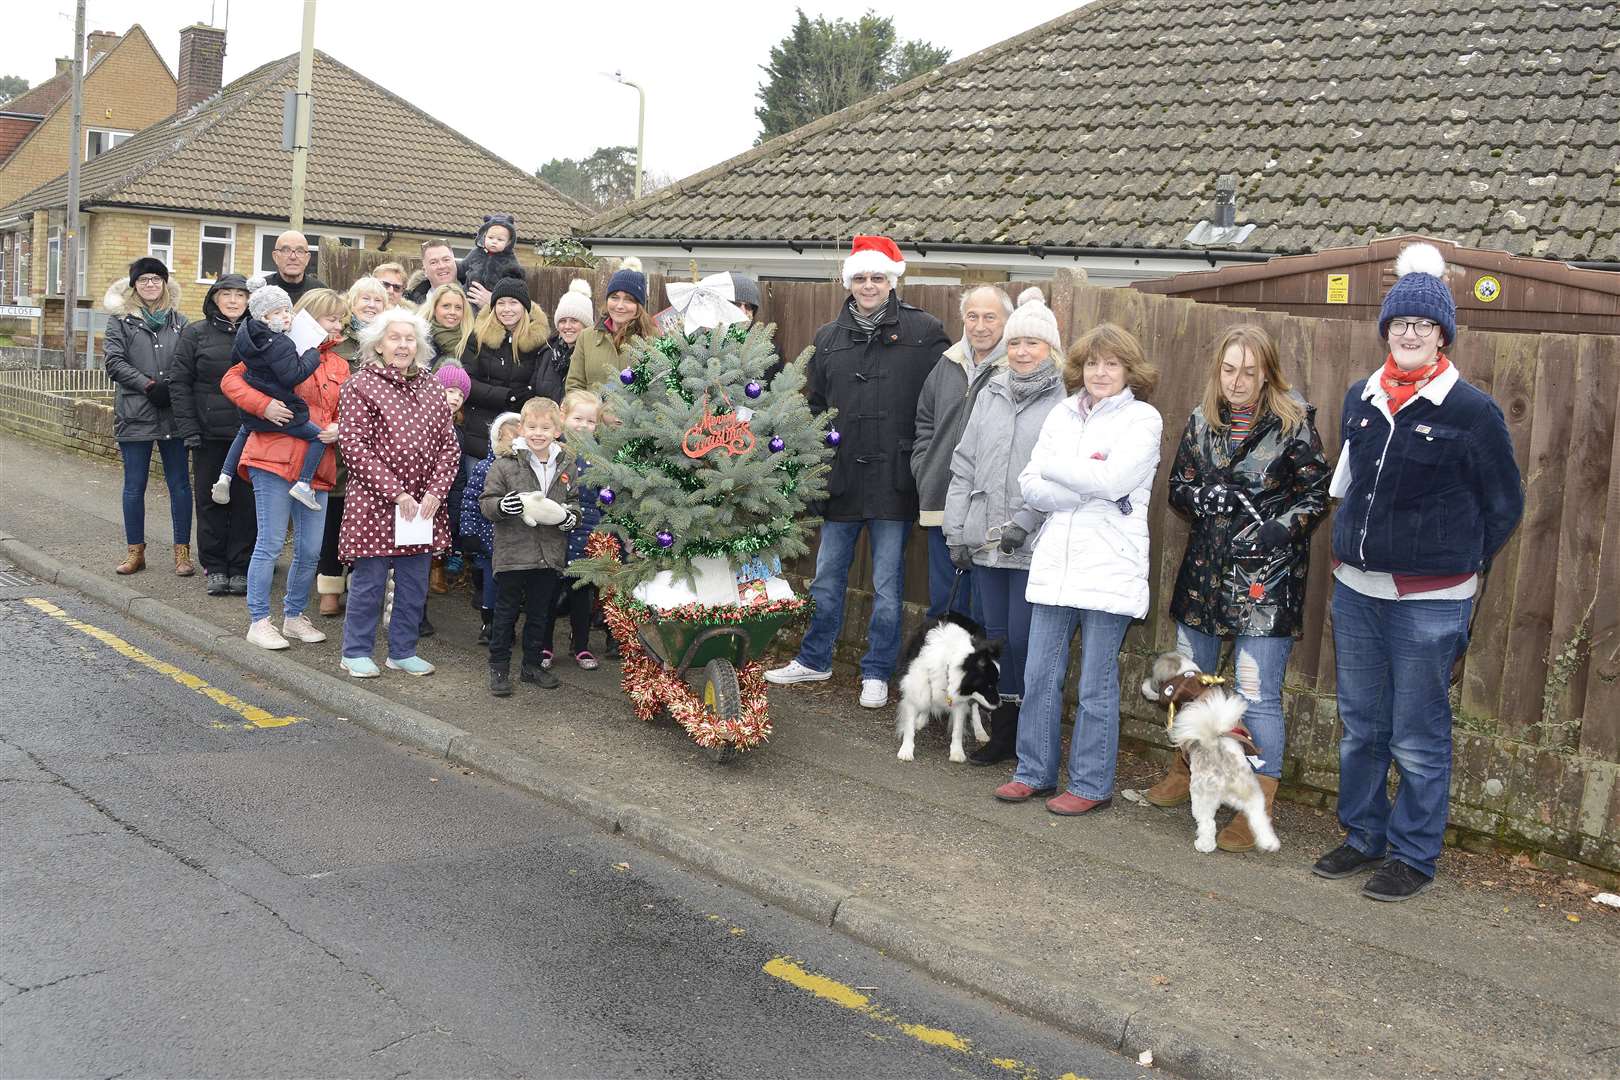 Residents gather in Kennington before presenting the tree. Picture: Paul Amos